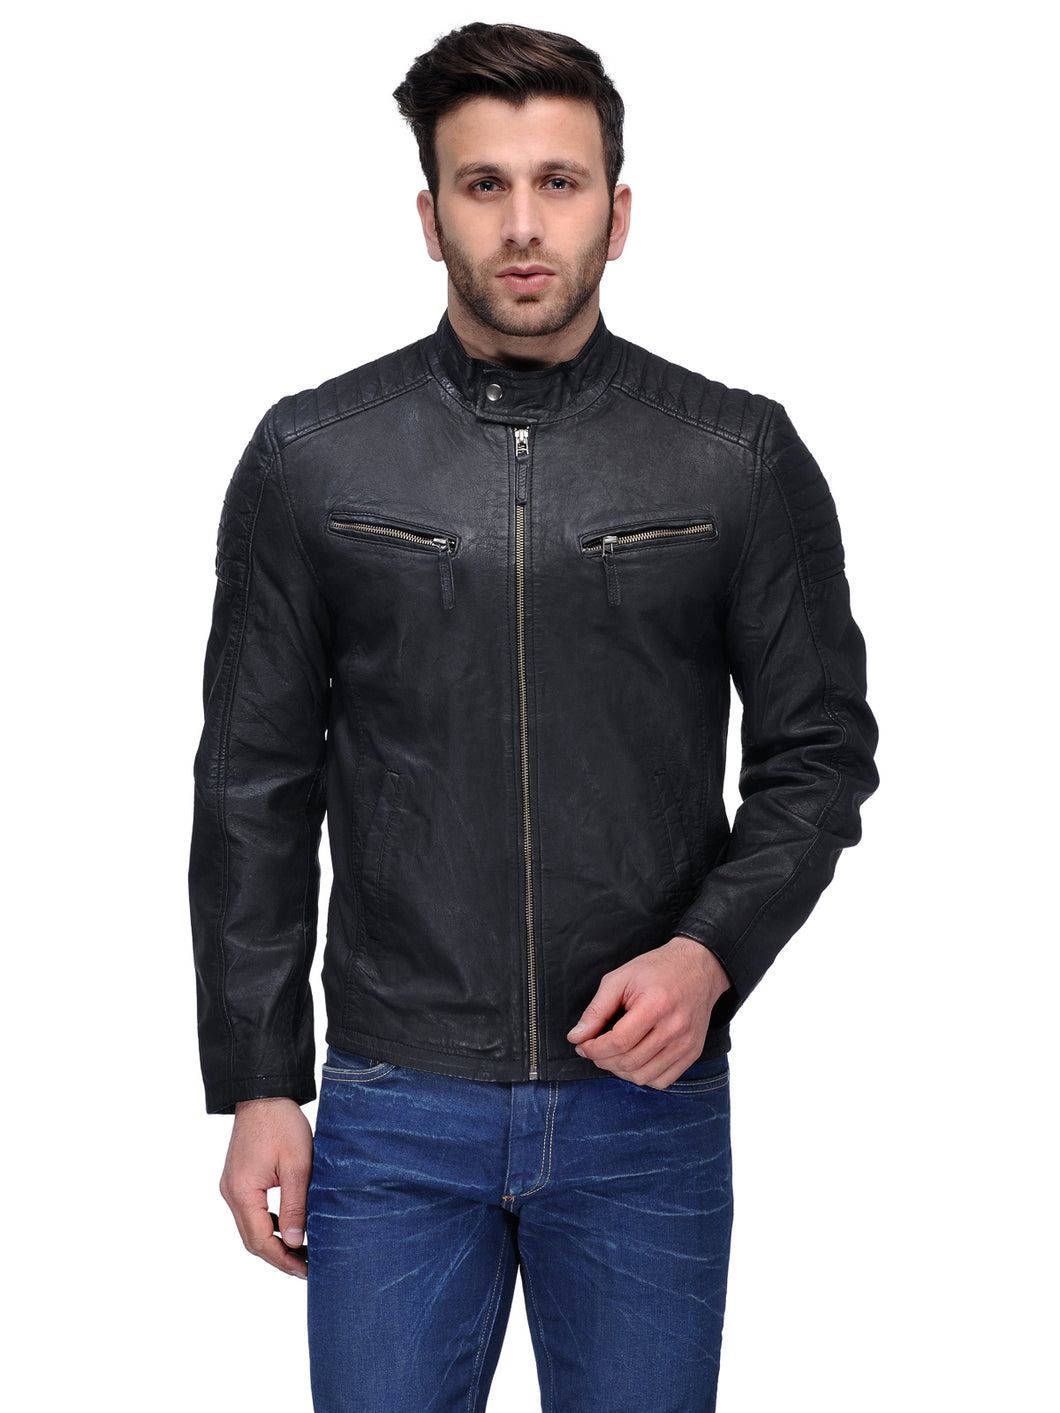 Branded Leather Jacket - Buy Branded Leather Jacket online in India